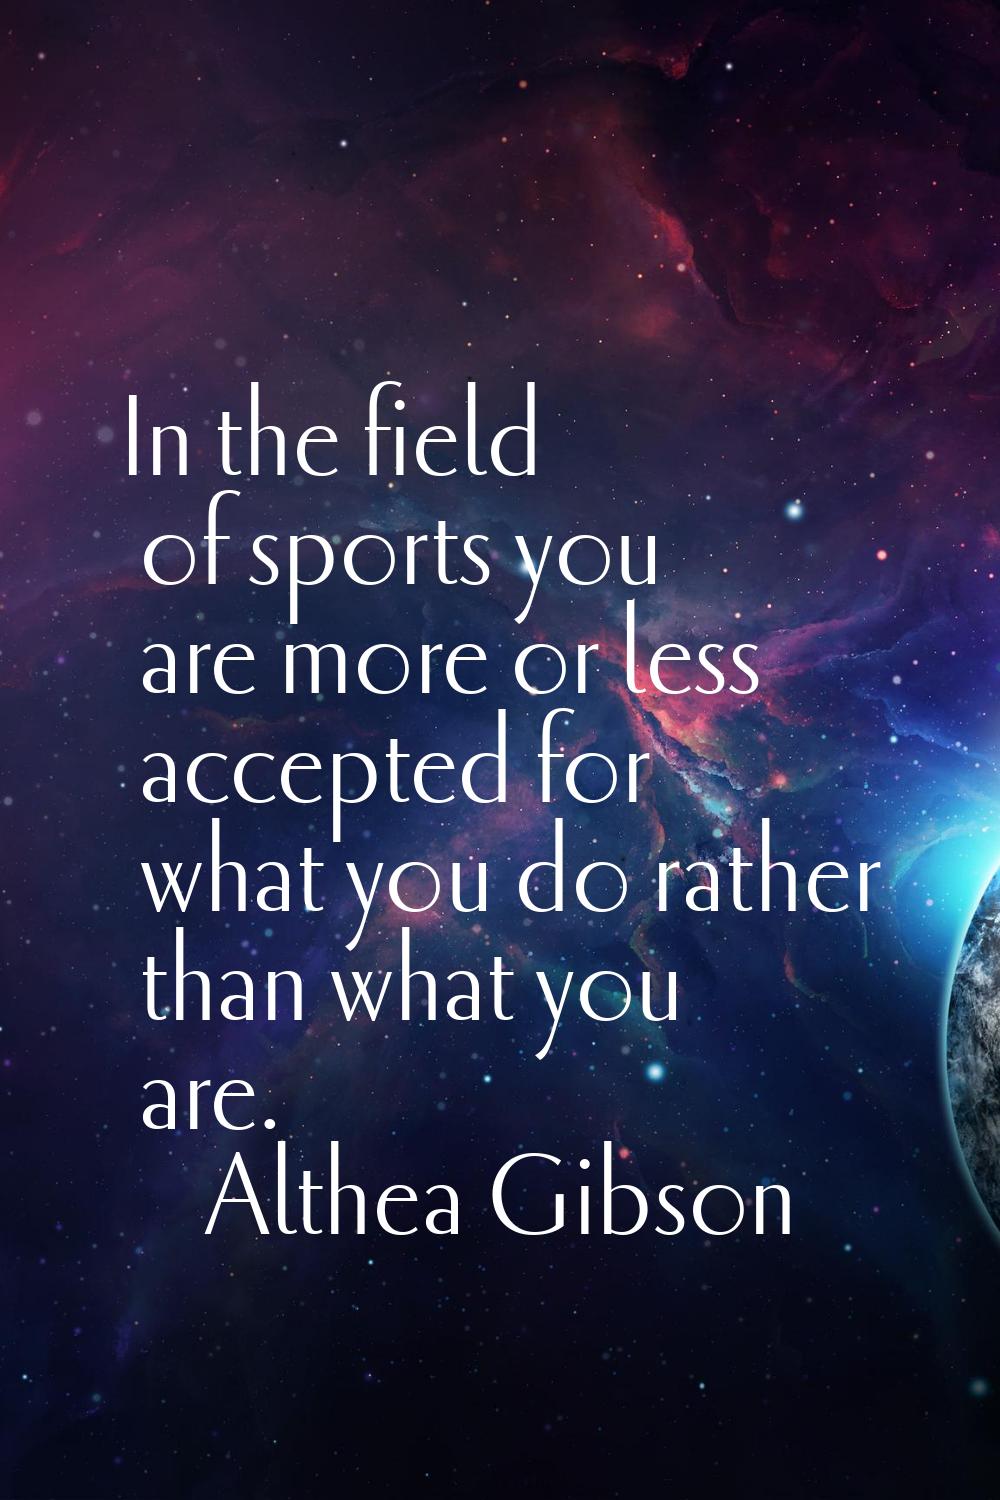 In the field of sports you are more or less accepted for what you do rather than what you are.